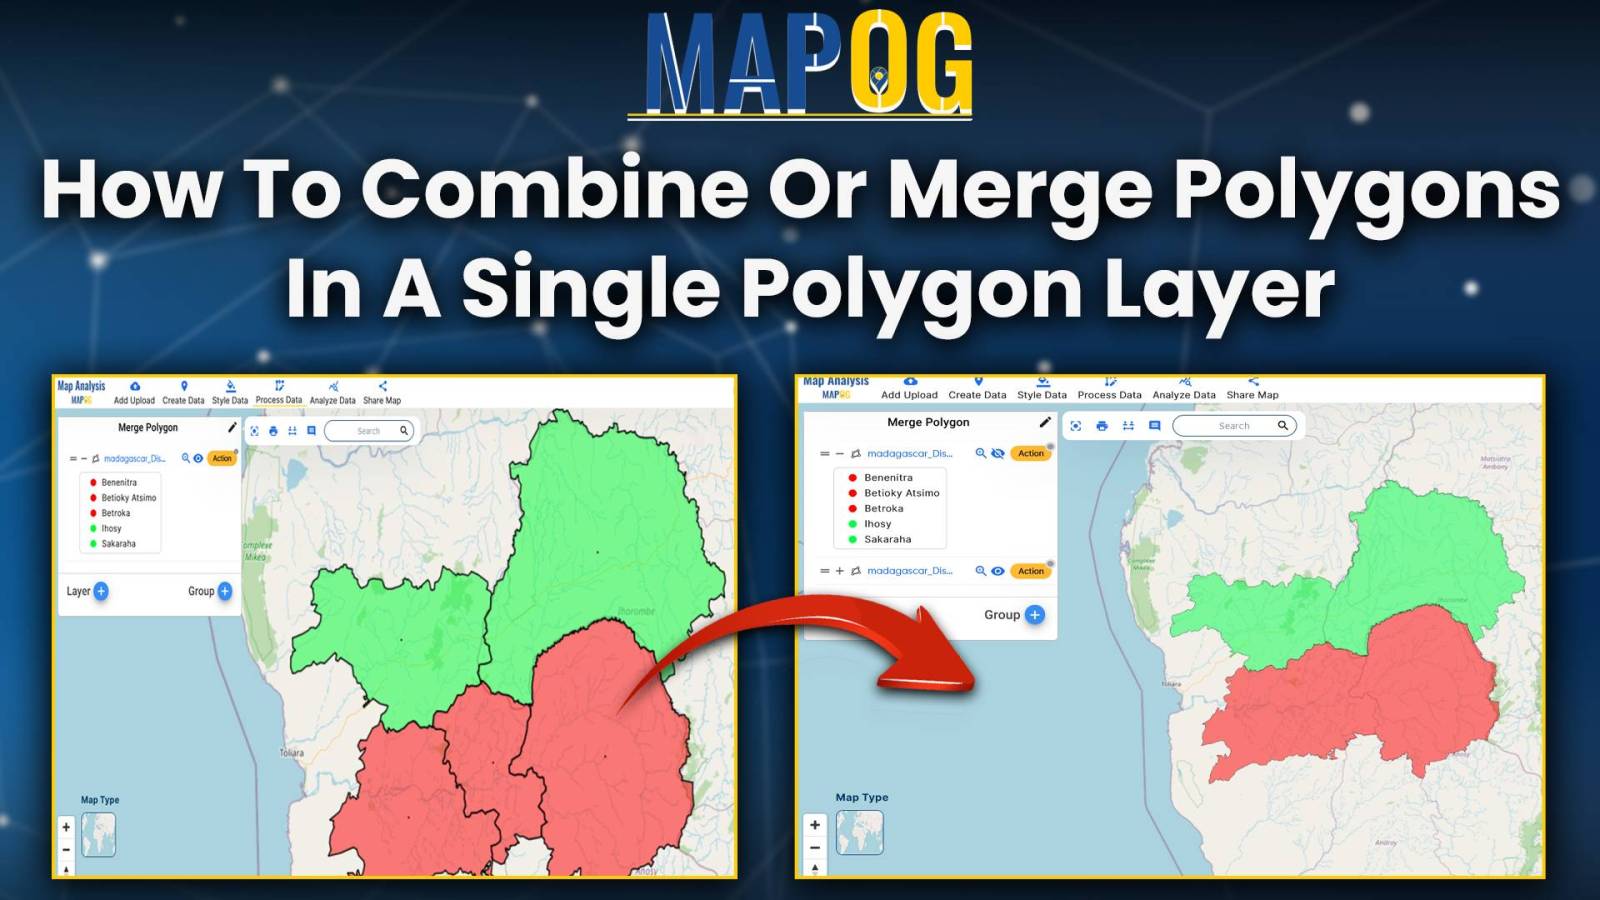 How to combine or merge polygons in a single polygon layer